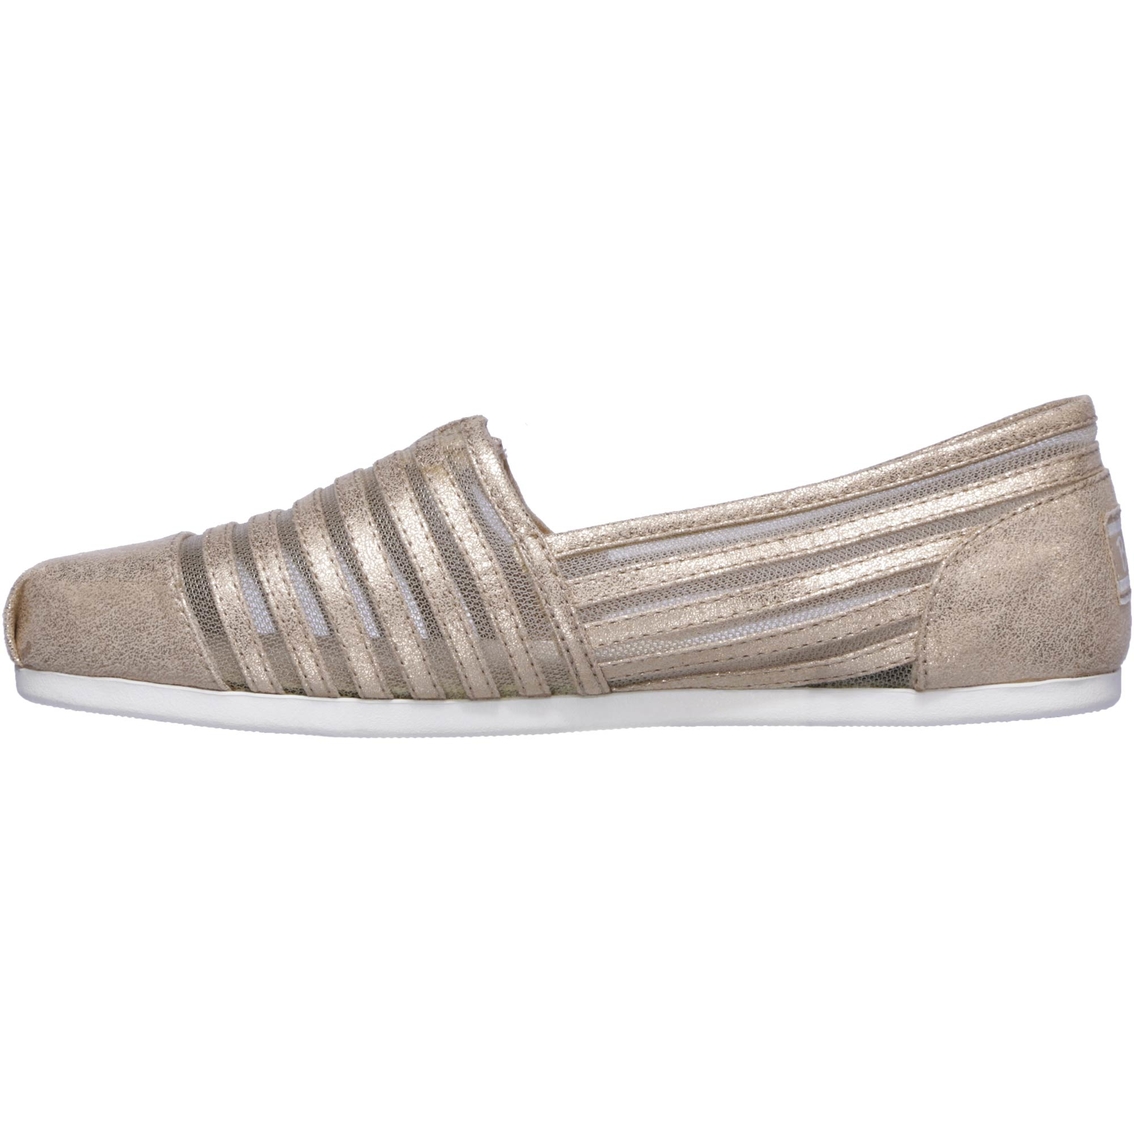 BOBS Women's Plush Obsessed Leather and Mesh Slip On Shoes - Image 3 of 6